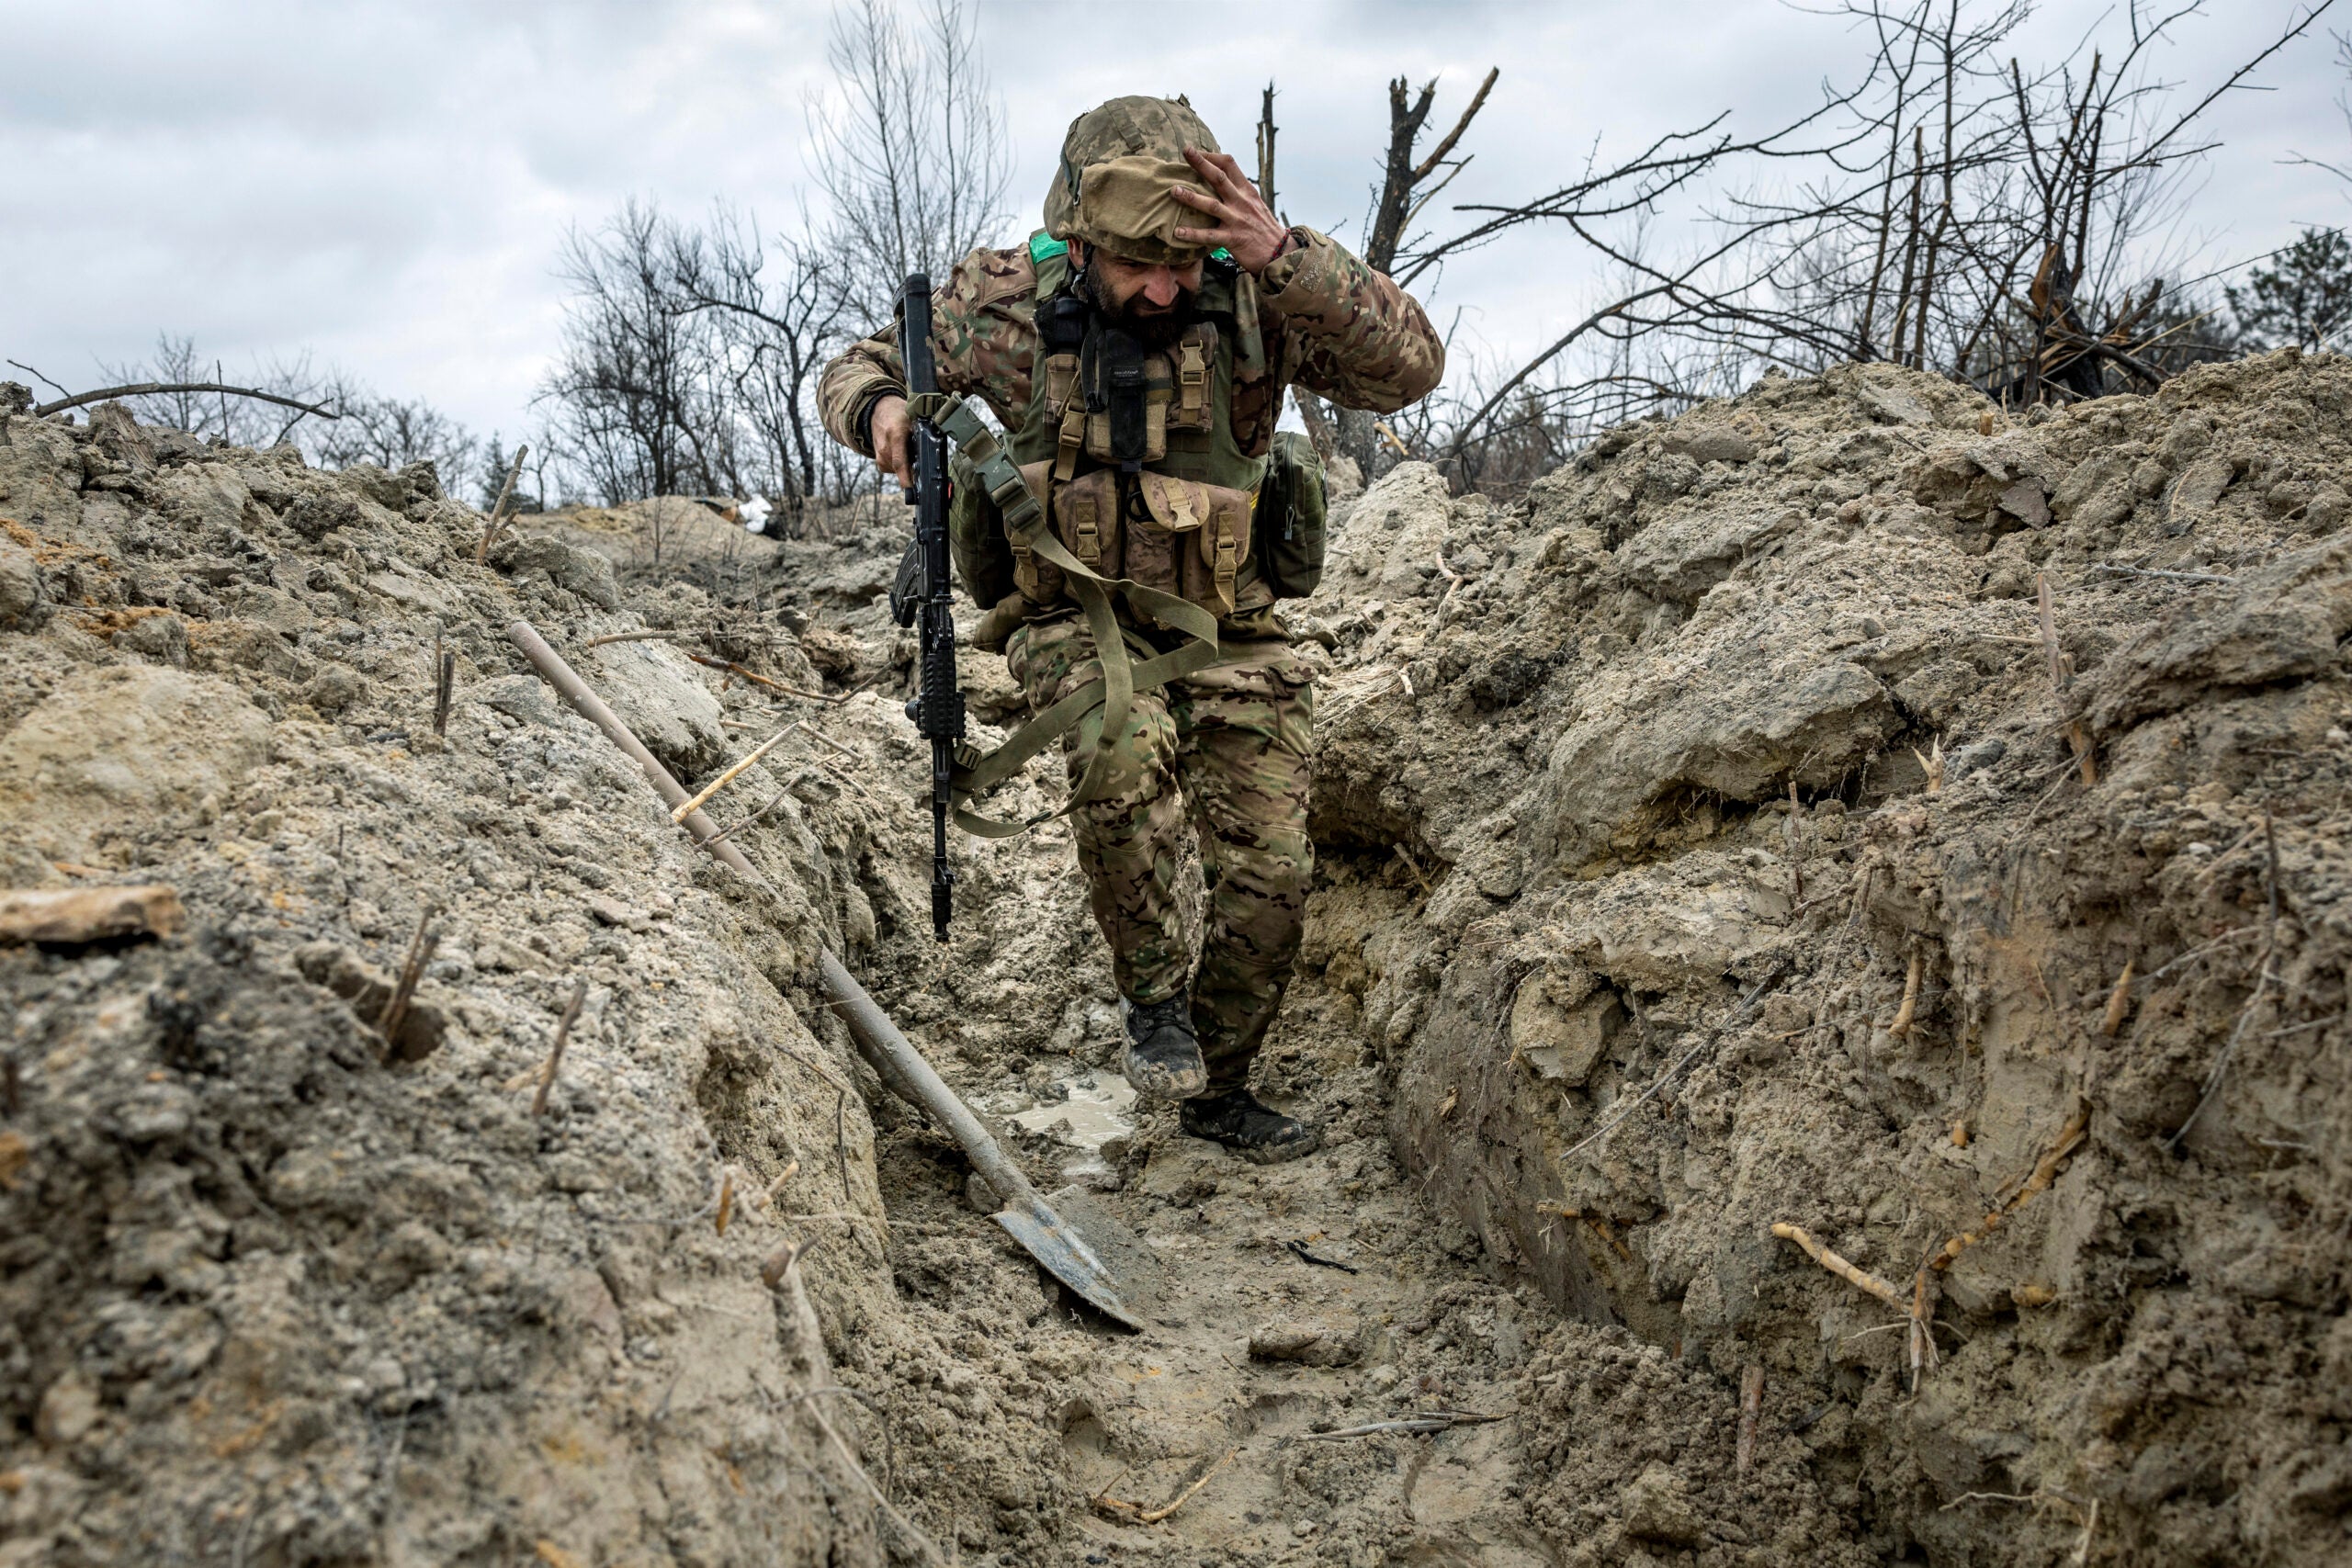 BAKHMUT, UKRAINE - MARCH 05:  Ukrainian medic "Doc" with the 28th Brigade runs through a partially dug trench along the frontline on March 05, 2023 outside of Bakhmut, Ukraine. The Ukrainian Army medic, an Odessa dentist in civilian life, said was a guitarist in band Uragan Metal for 13 years before he joined the Army following the Russian invasion. Russian forces have been attacking Ukrainian troops as part of an offensive to encircle Bakhmut in Ukraine's eastern Donbas region. (Photo by John Moore/Getty Images)